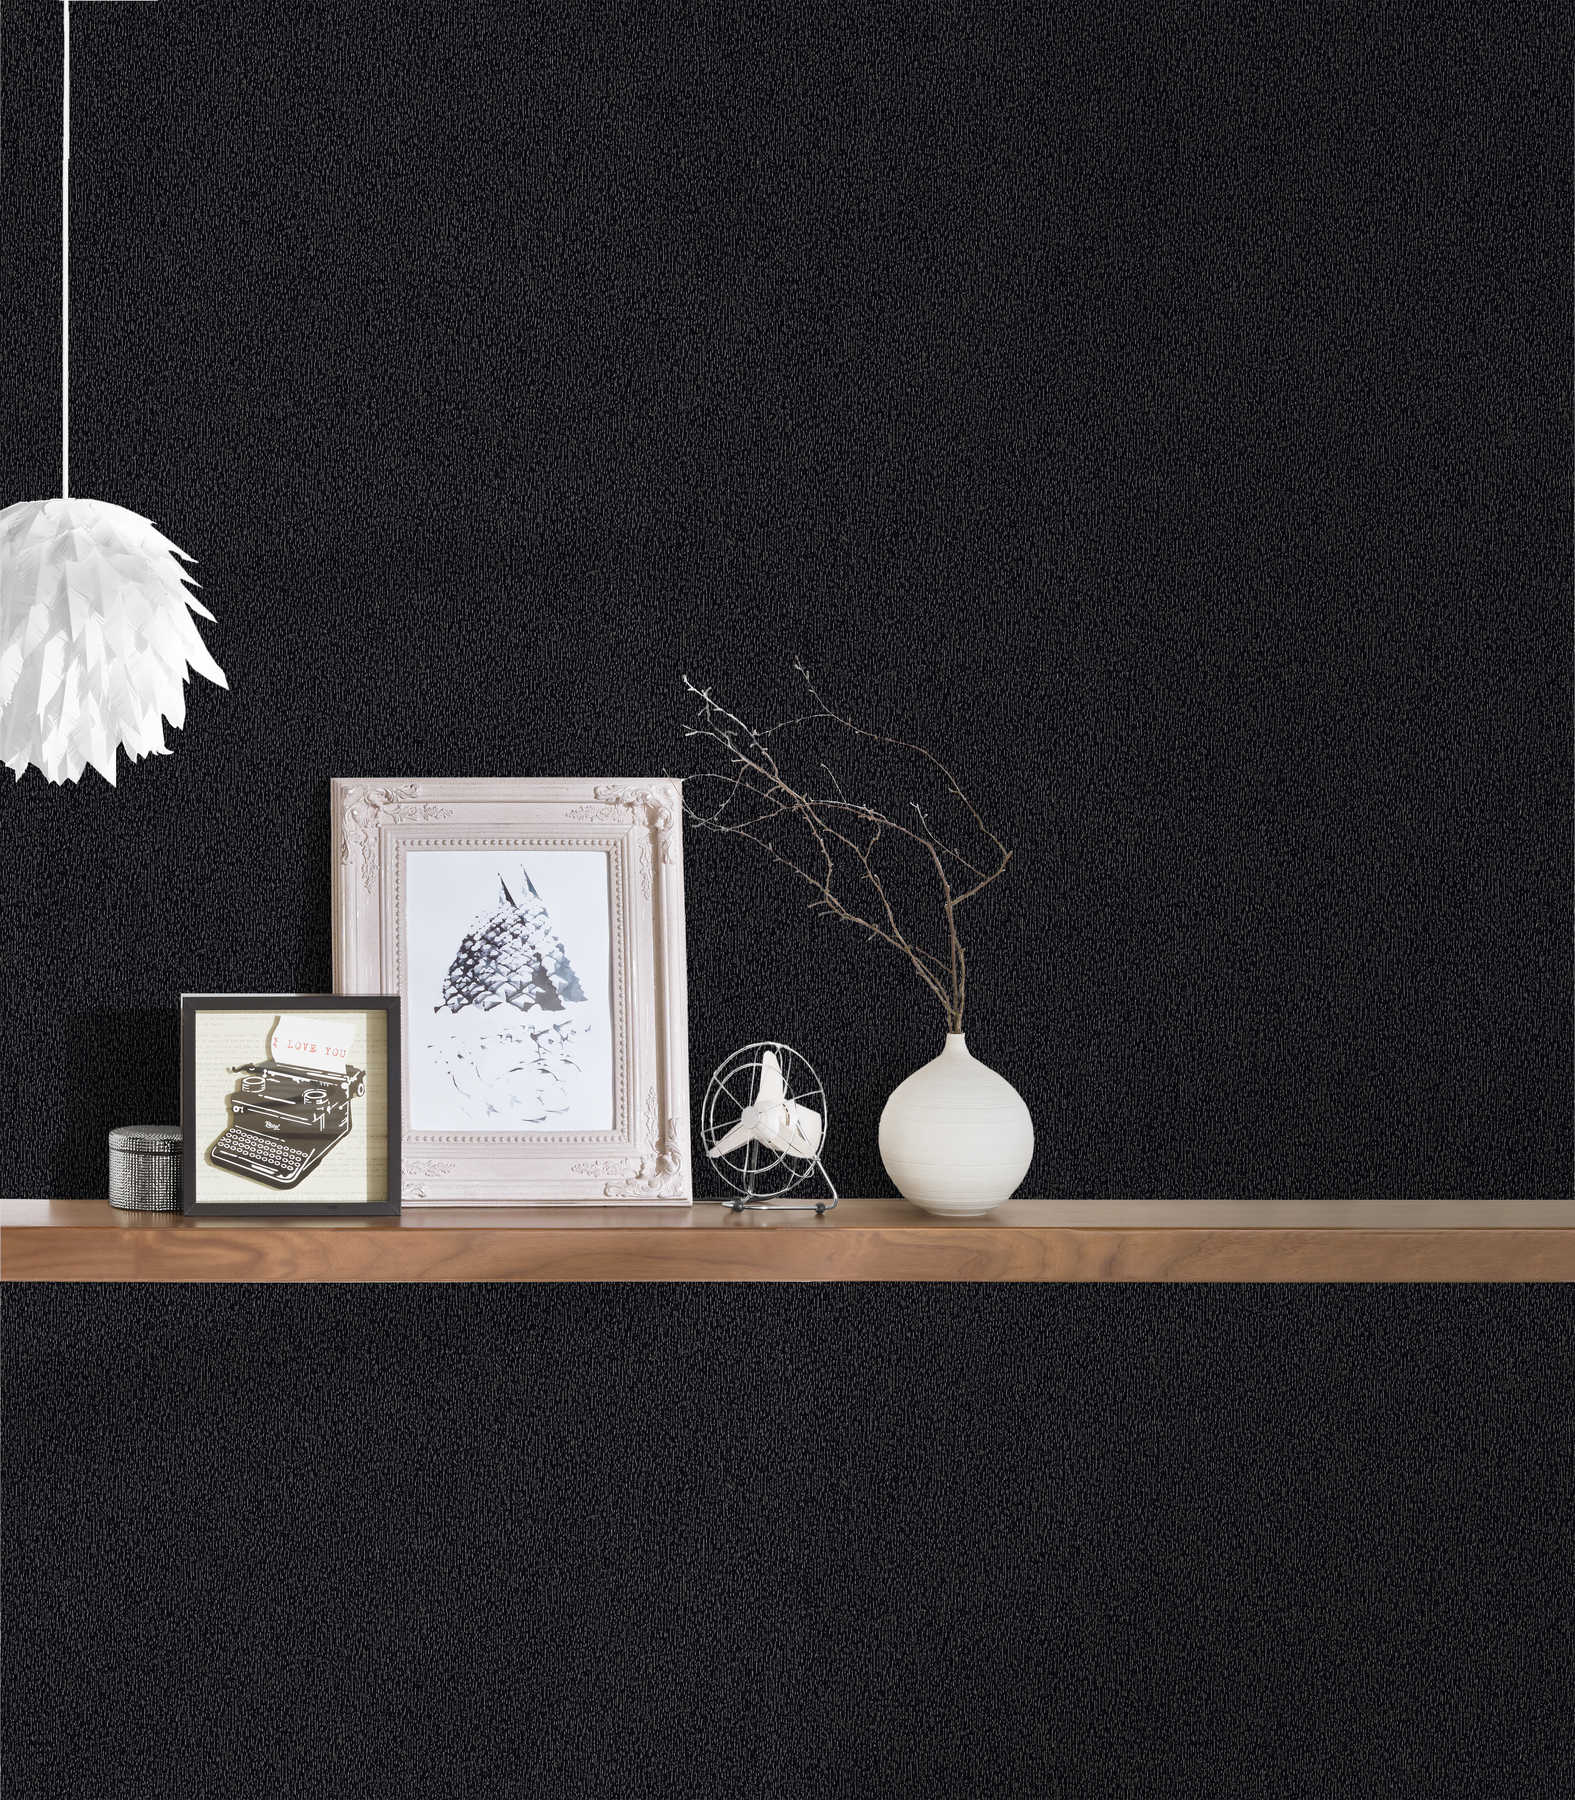             Wallpaper with texture pattern & natural hatching - black
        